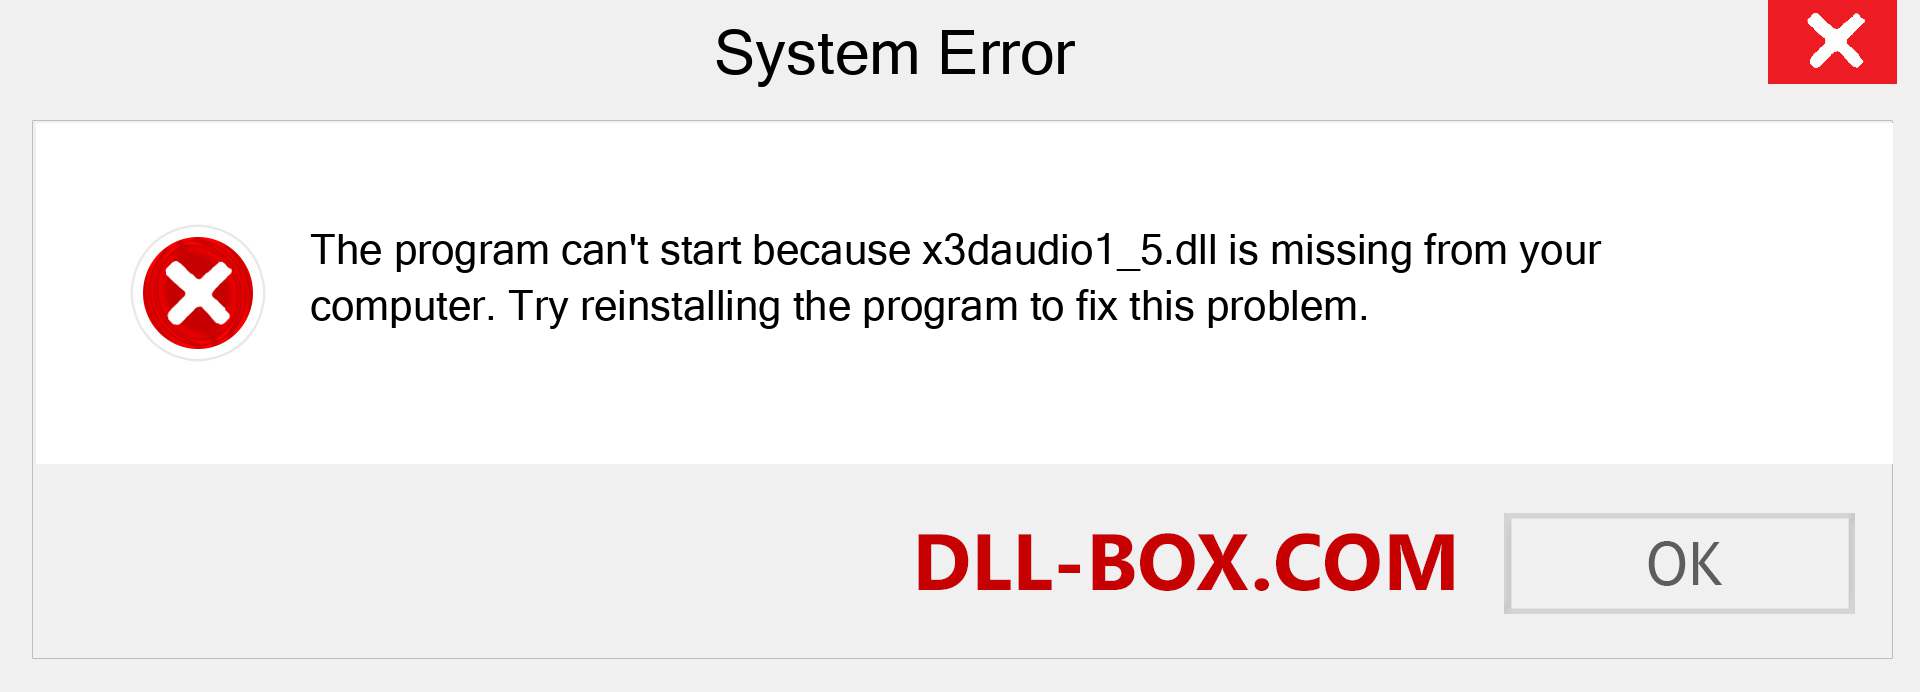  x3daudio1_5.dll file is missing?. Download for Windows 7, 8, 10 - Fix  x3daudio1_5 dll Missing Error on Windows, photos, images